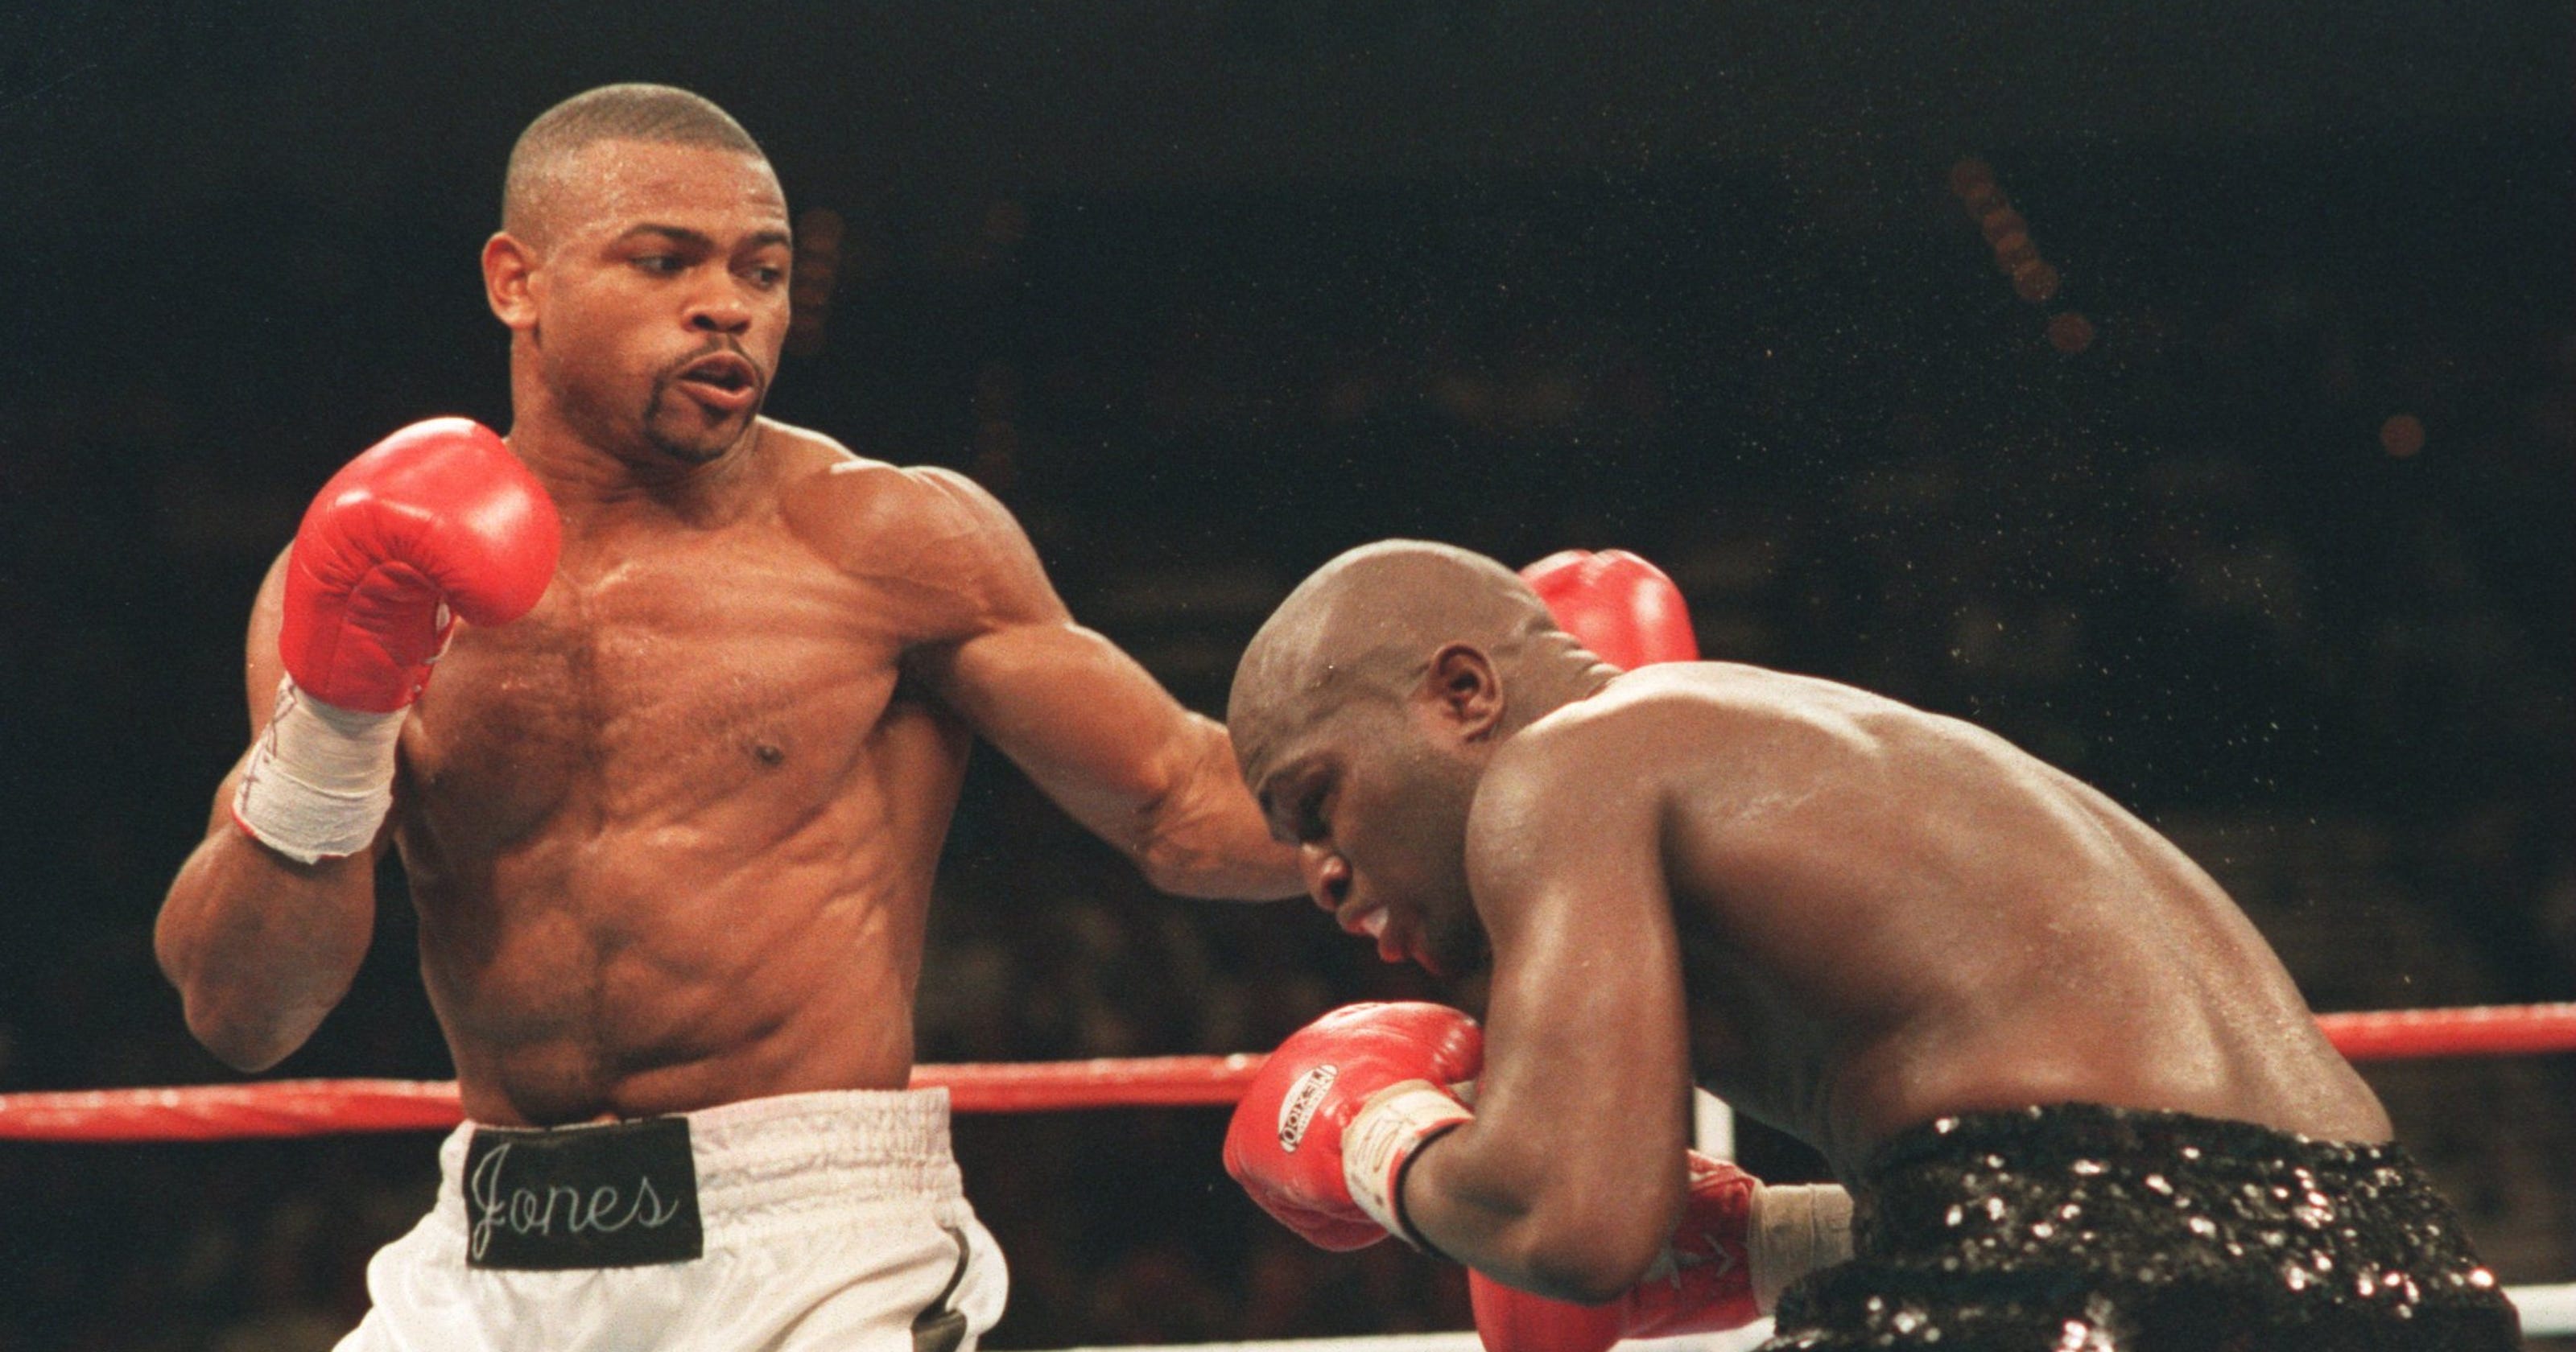 Roy Jones Jr. had 10 standout fights that shaped his career